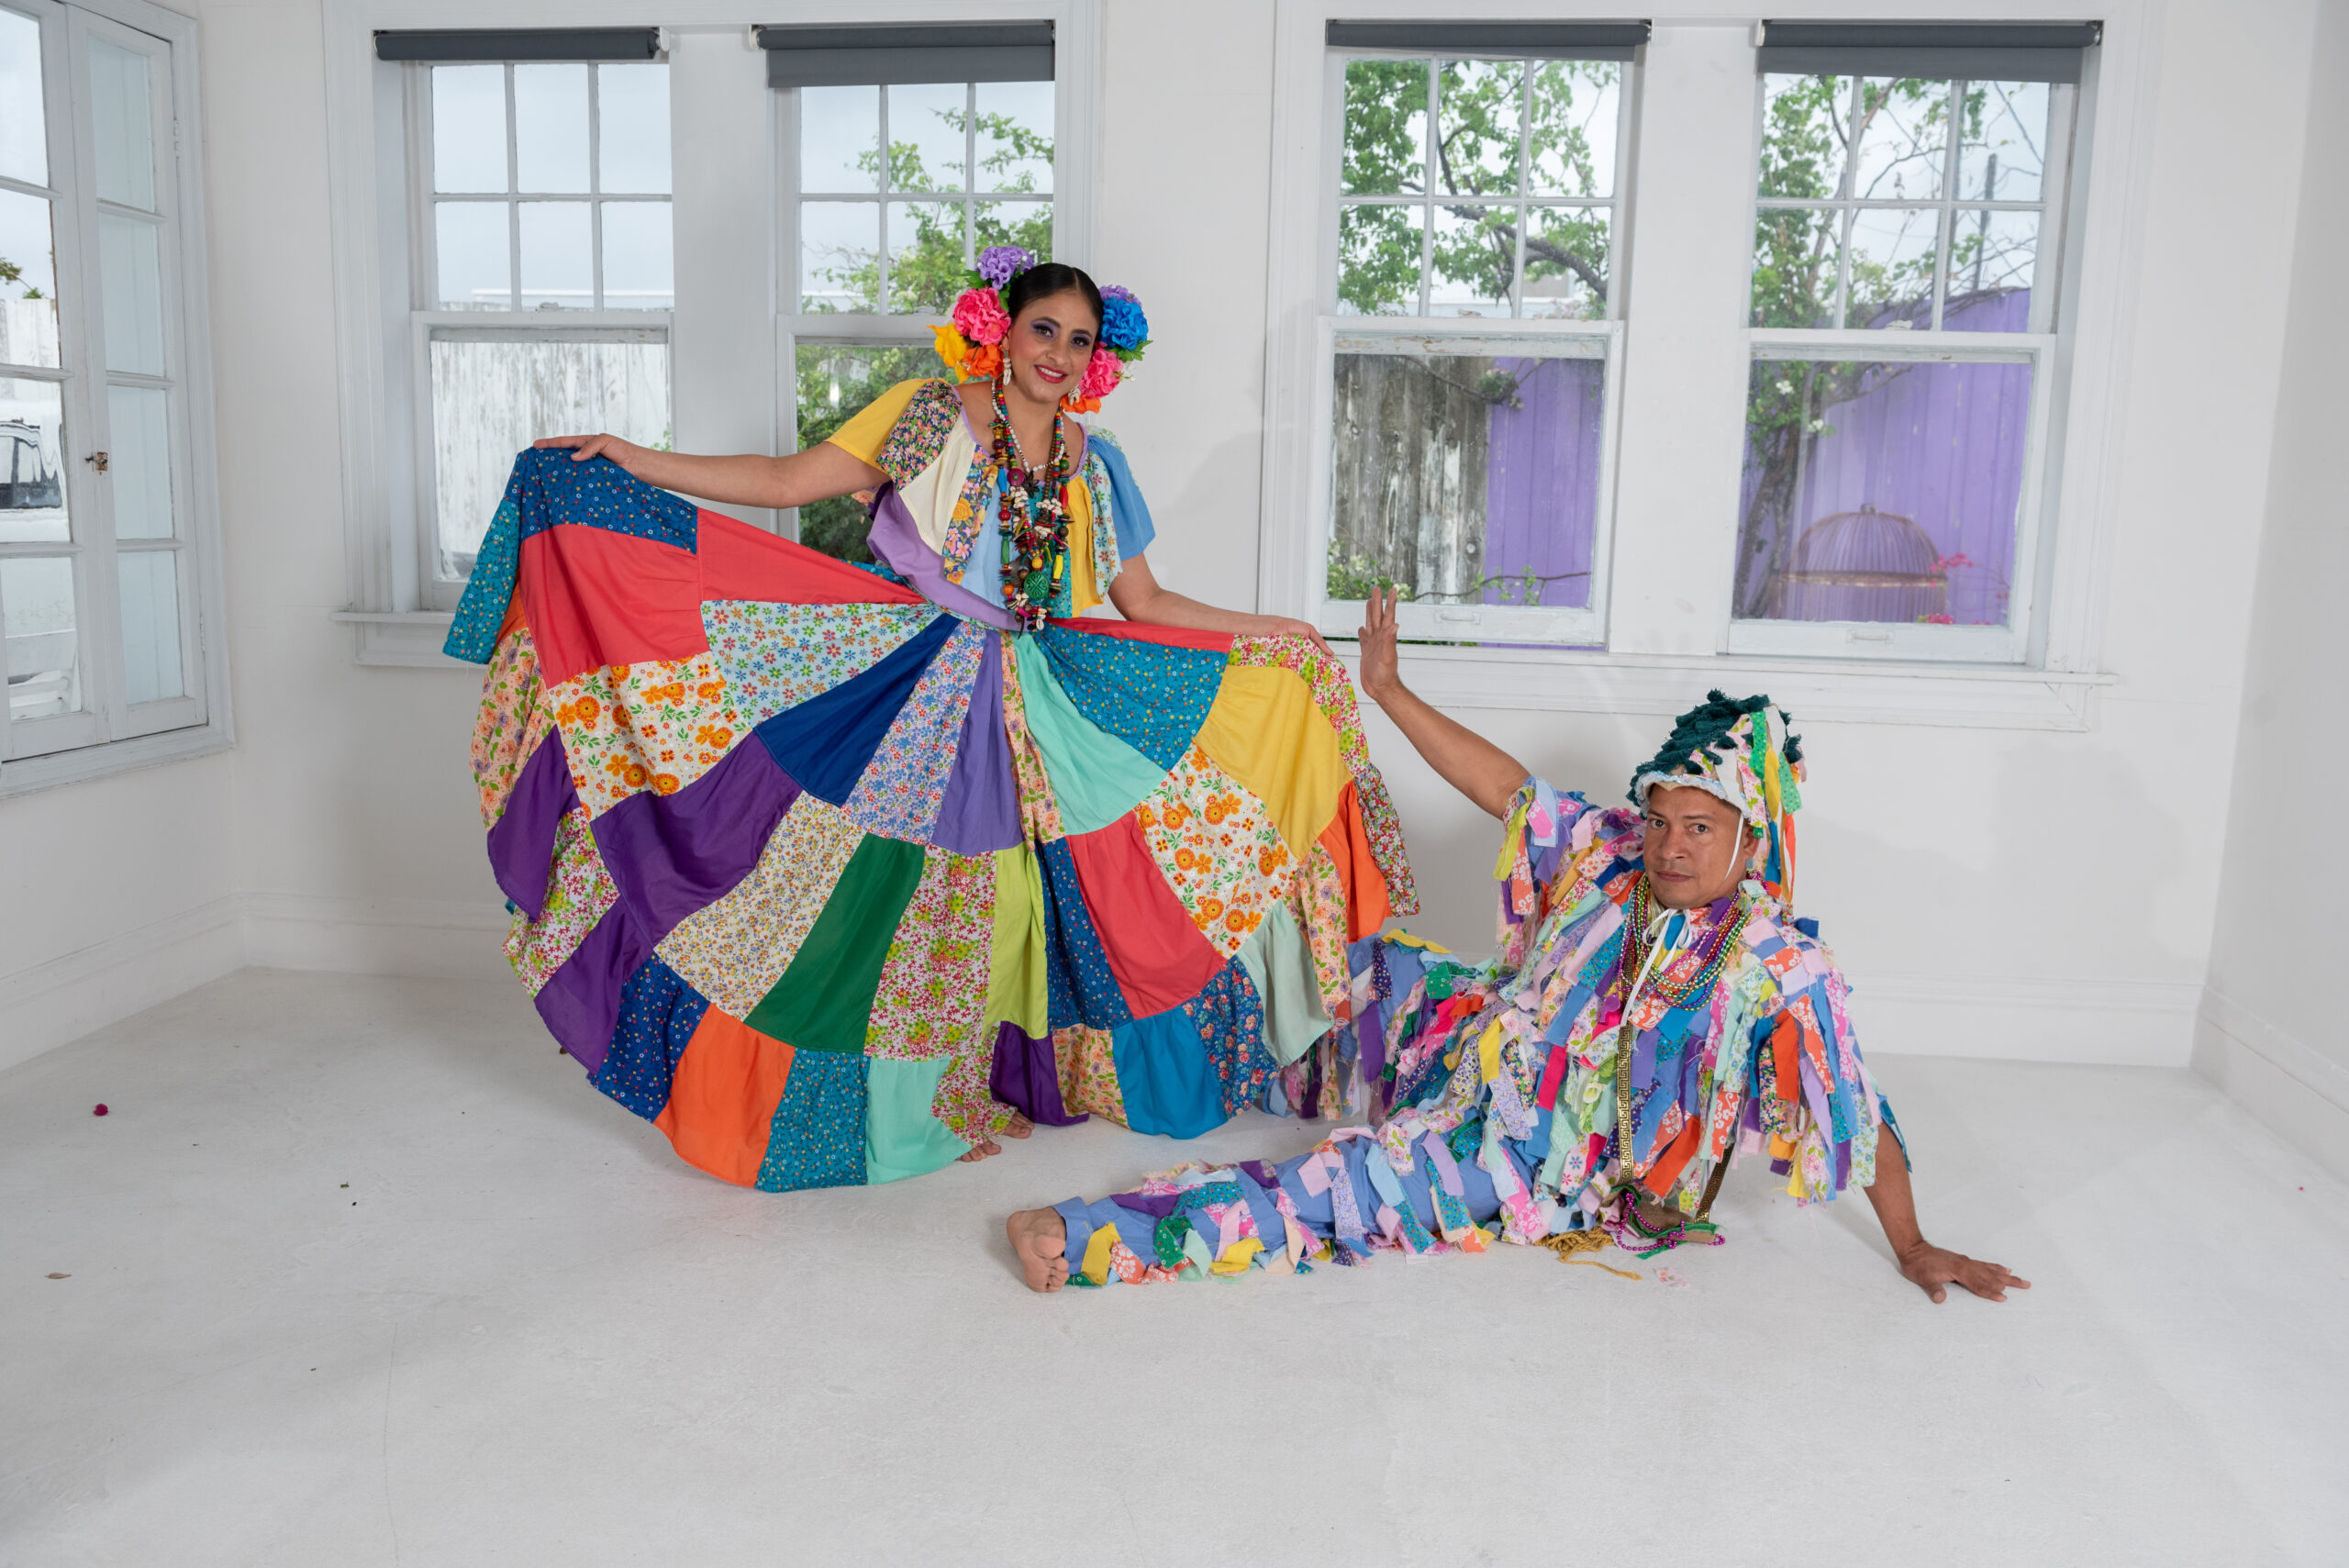 Two dancers in very colorful costumes pose. The woman holds out her colorful skirt to the sides. The man lays on the floor in front of her with one arm stretched out towards her. he wears an outfit with colorful strips of cloth hanging and a tall hat with strips of colorful cloth.